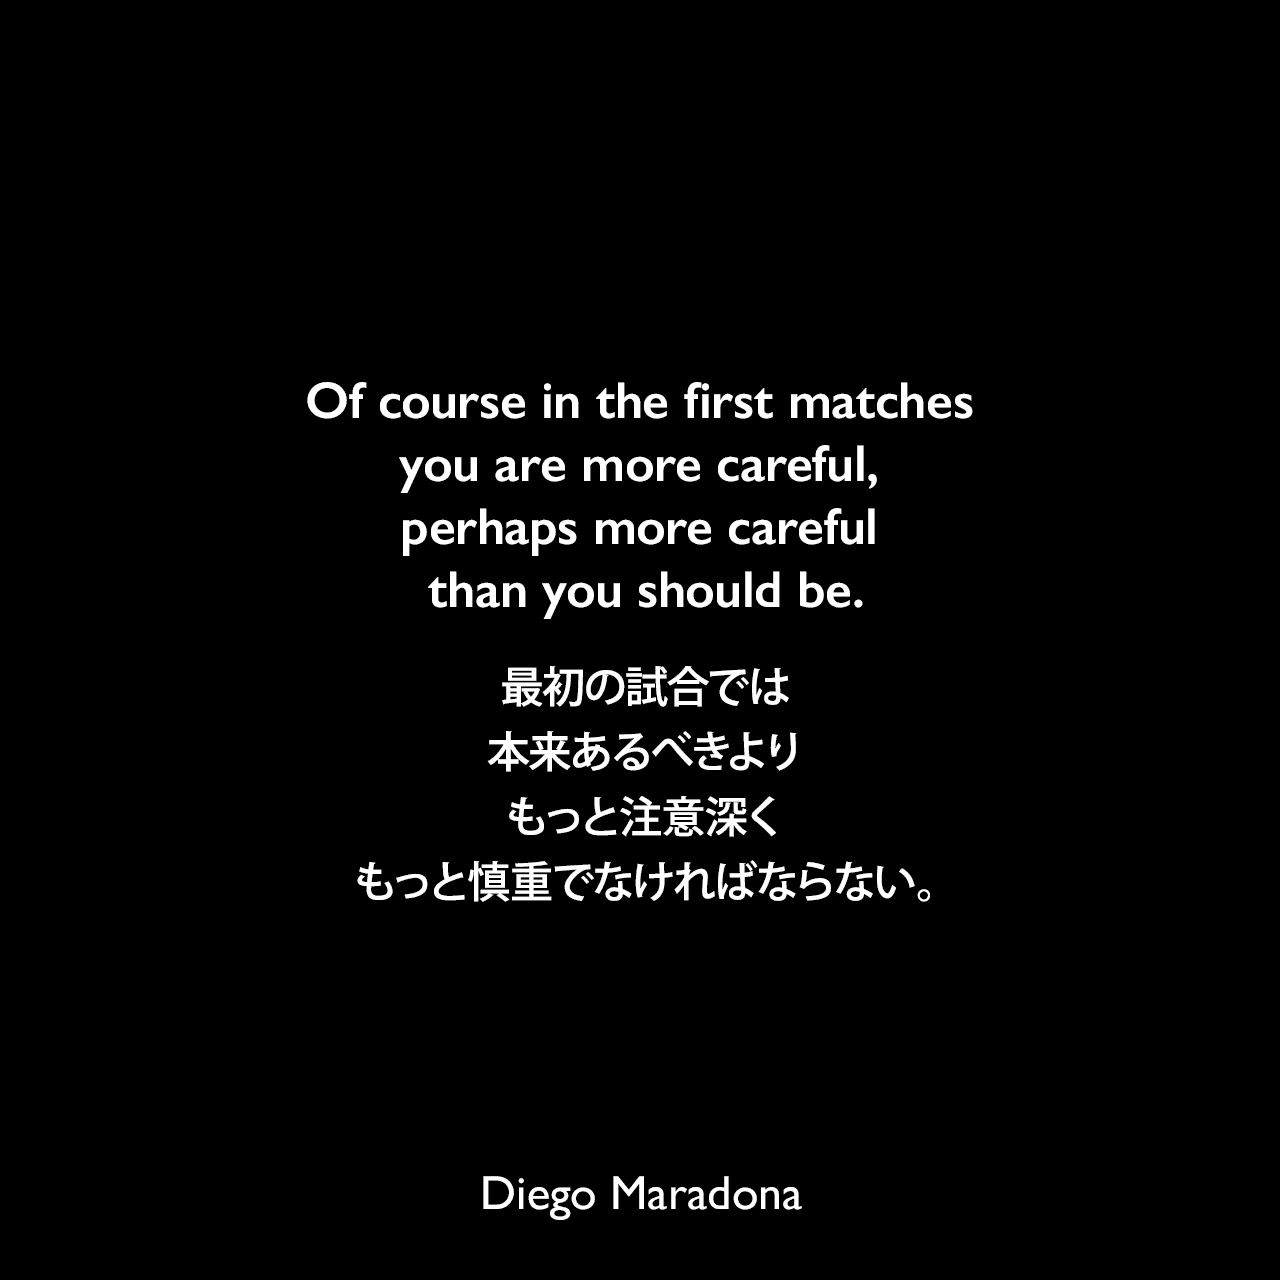 Of course in the first matches you are more careful, perhaps more careful than you should be.最初の試合では、本来あるべきよりもっと注意深くもっと慎重でなければならない。